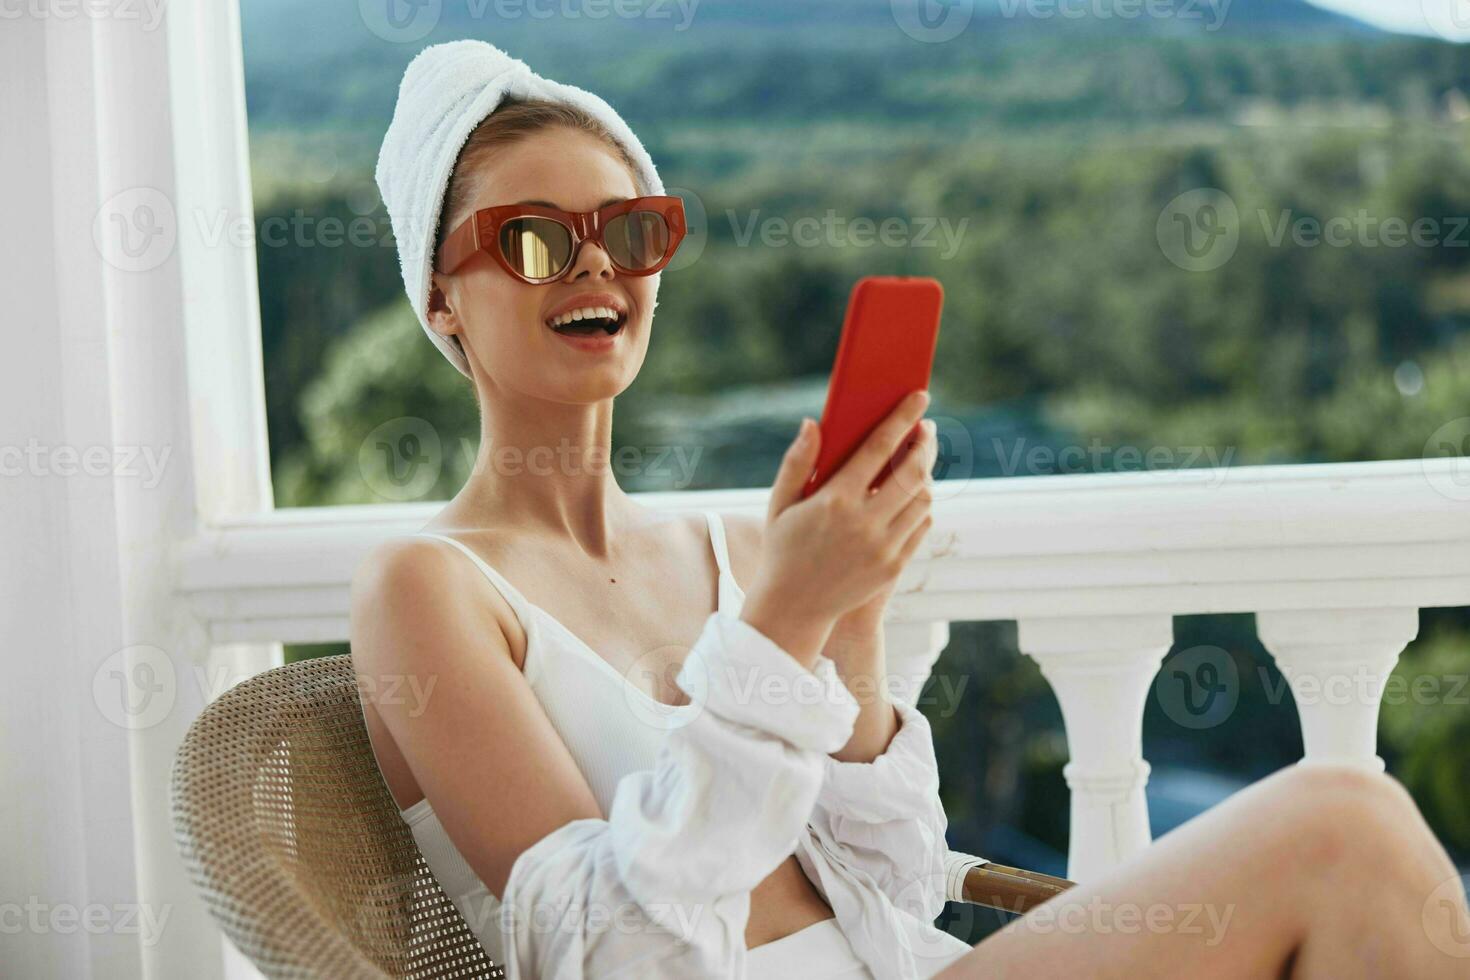 Portrait of young woman enjoying the morning on the balcony looking at the mobile phone screen Lazy morning photo